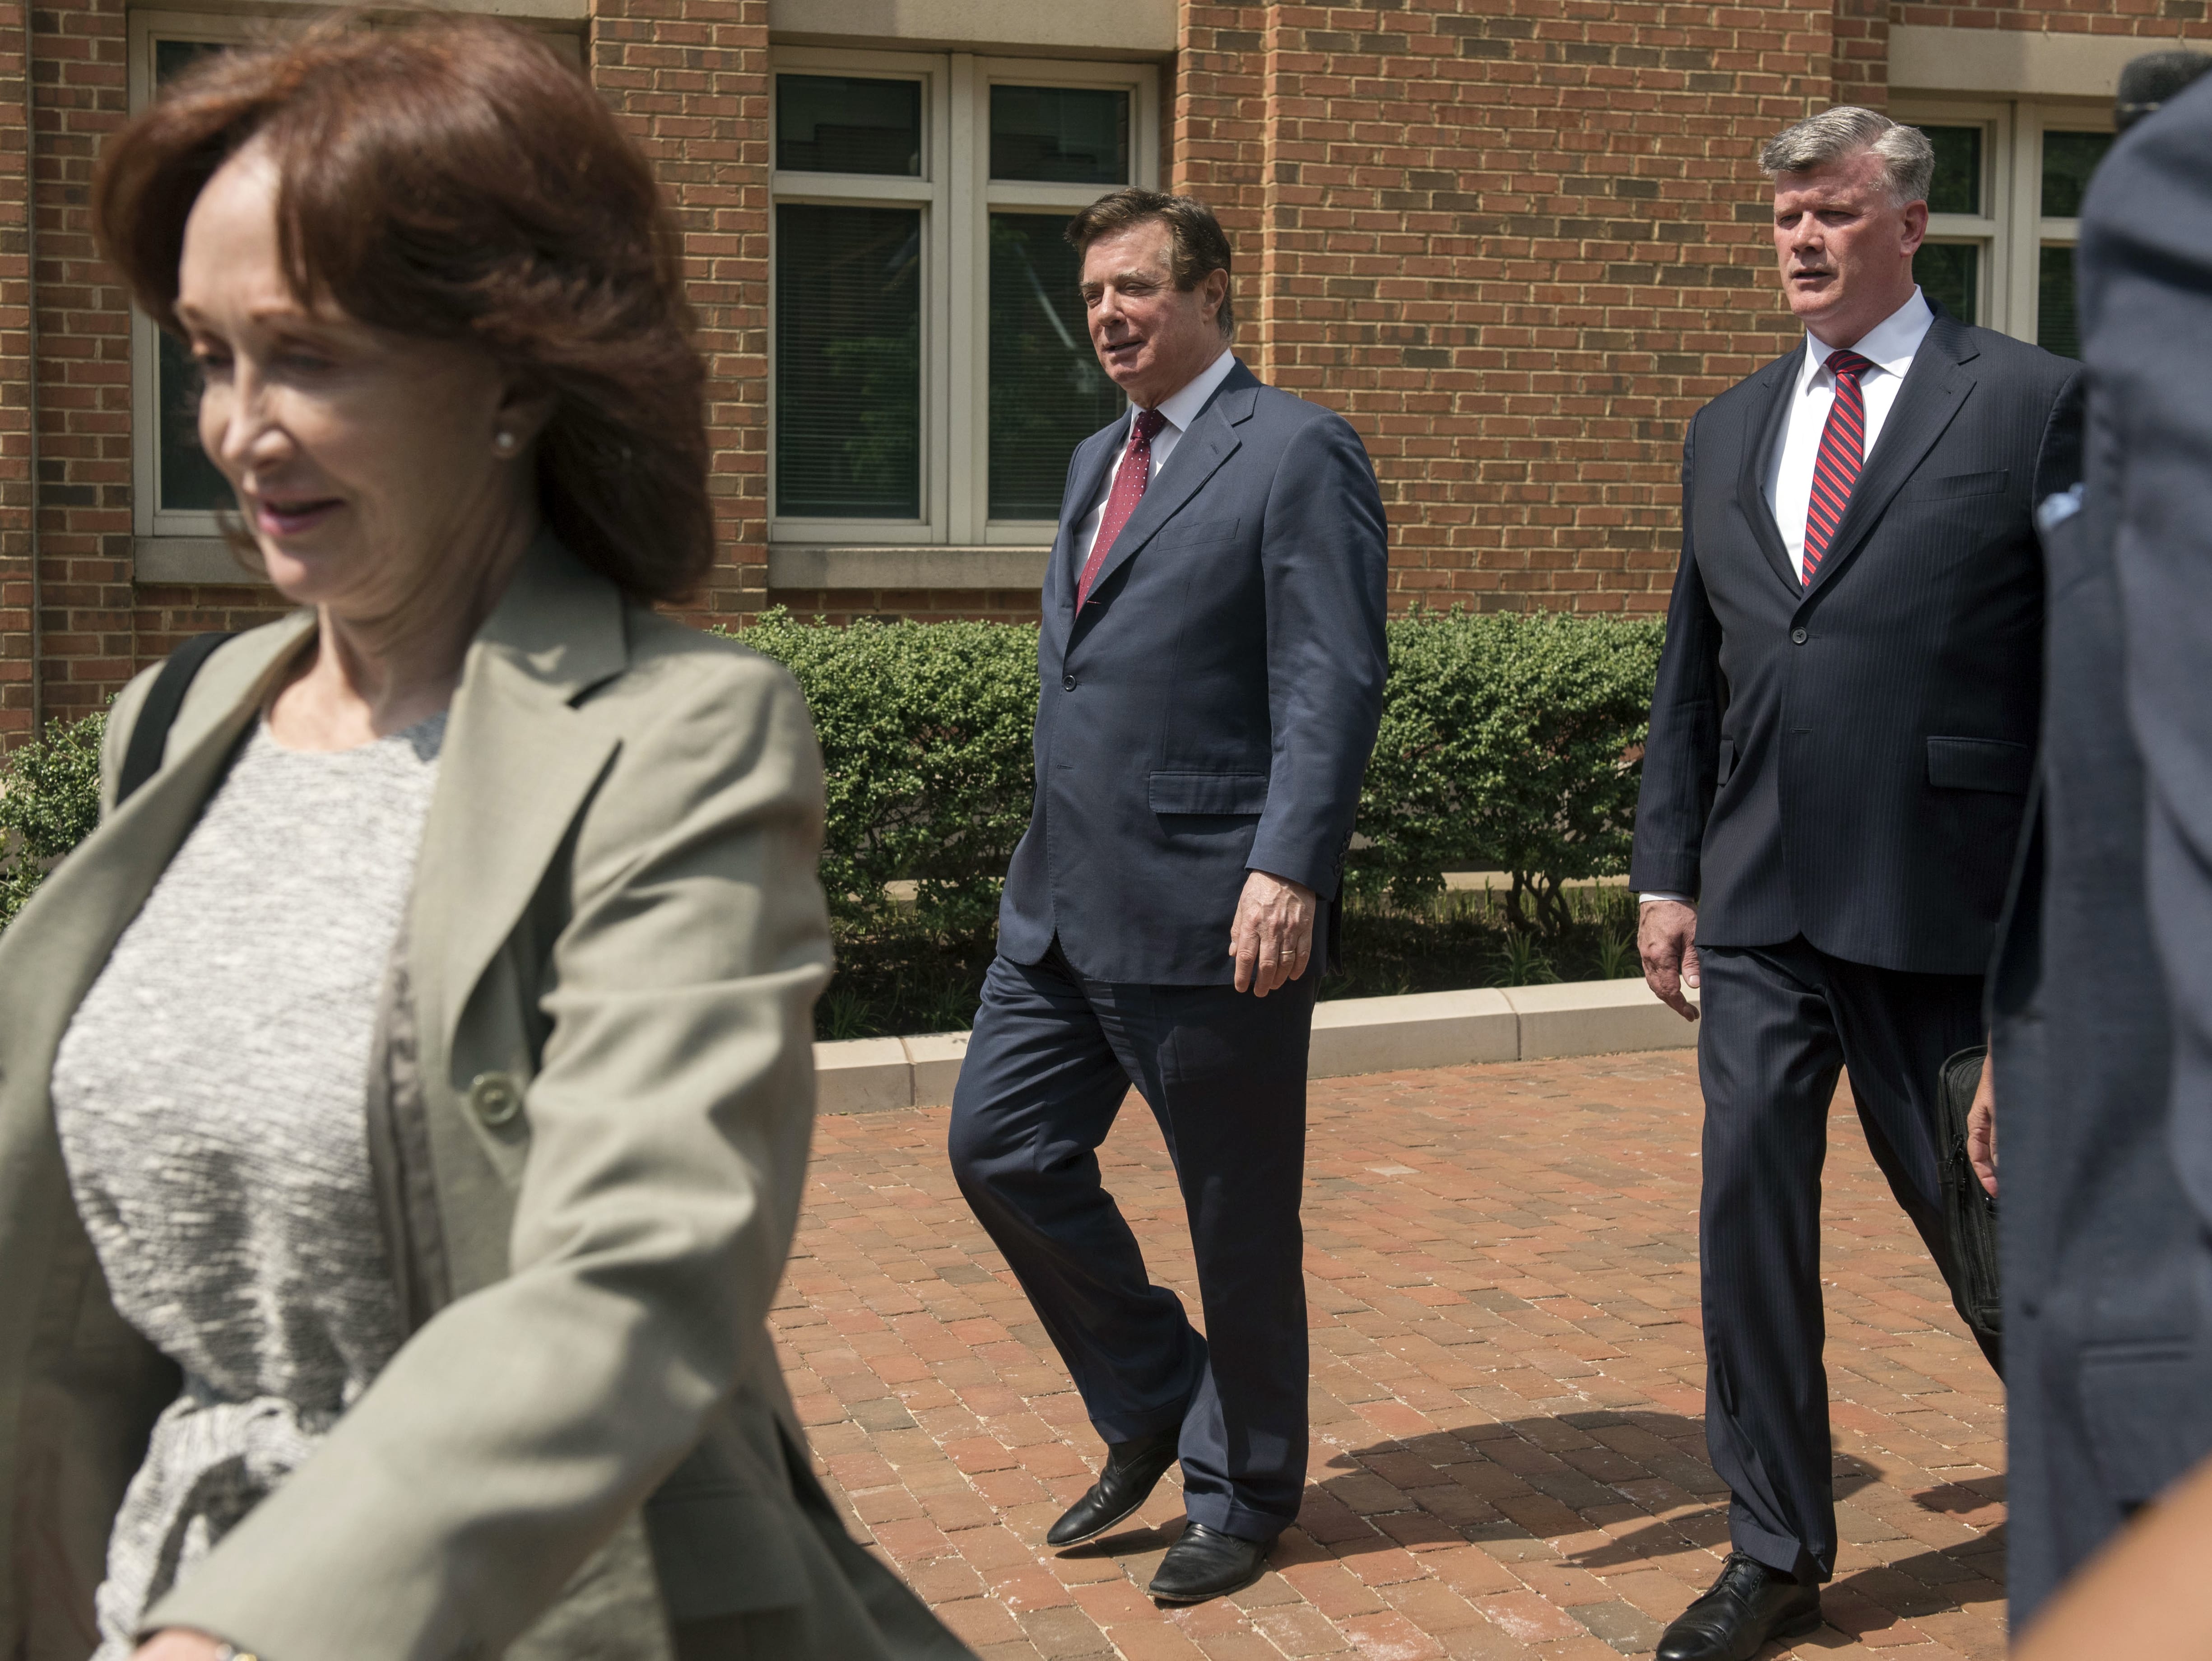 Paul Manafort leaves the Alexandria Federal Courthouse with his wife, Kathleen Manafort, left, and attorney Kevin Downing, right, on Friday, May 4, 2018, in Alexandria, Va.